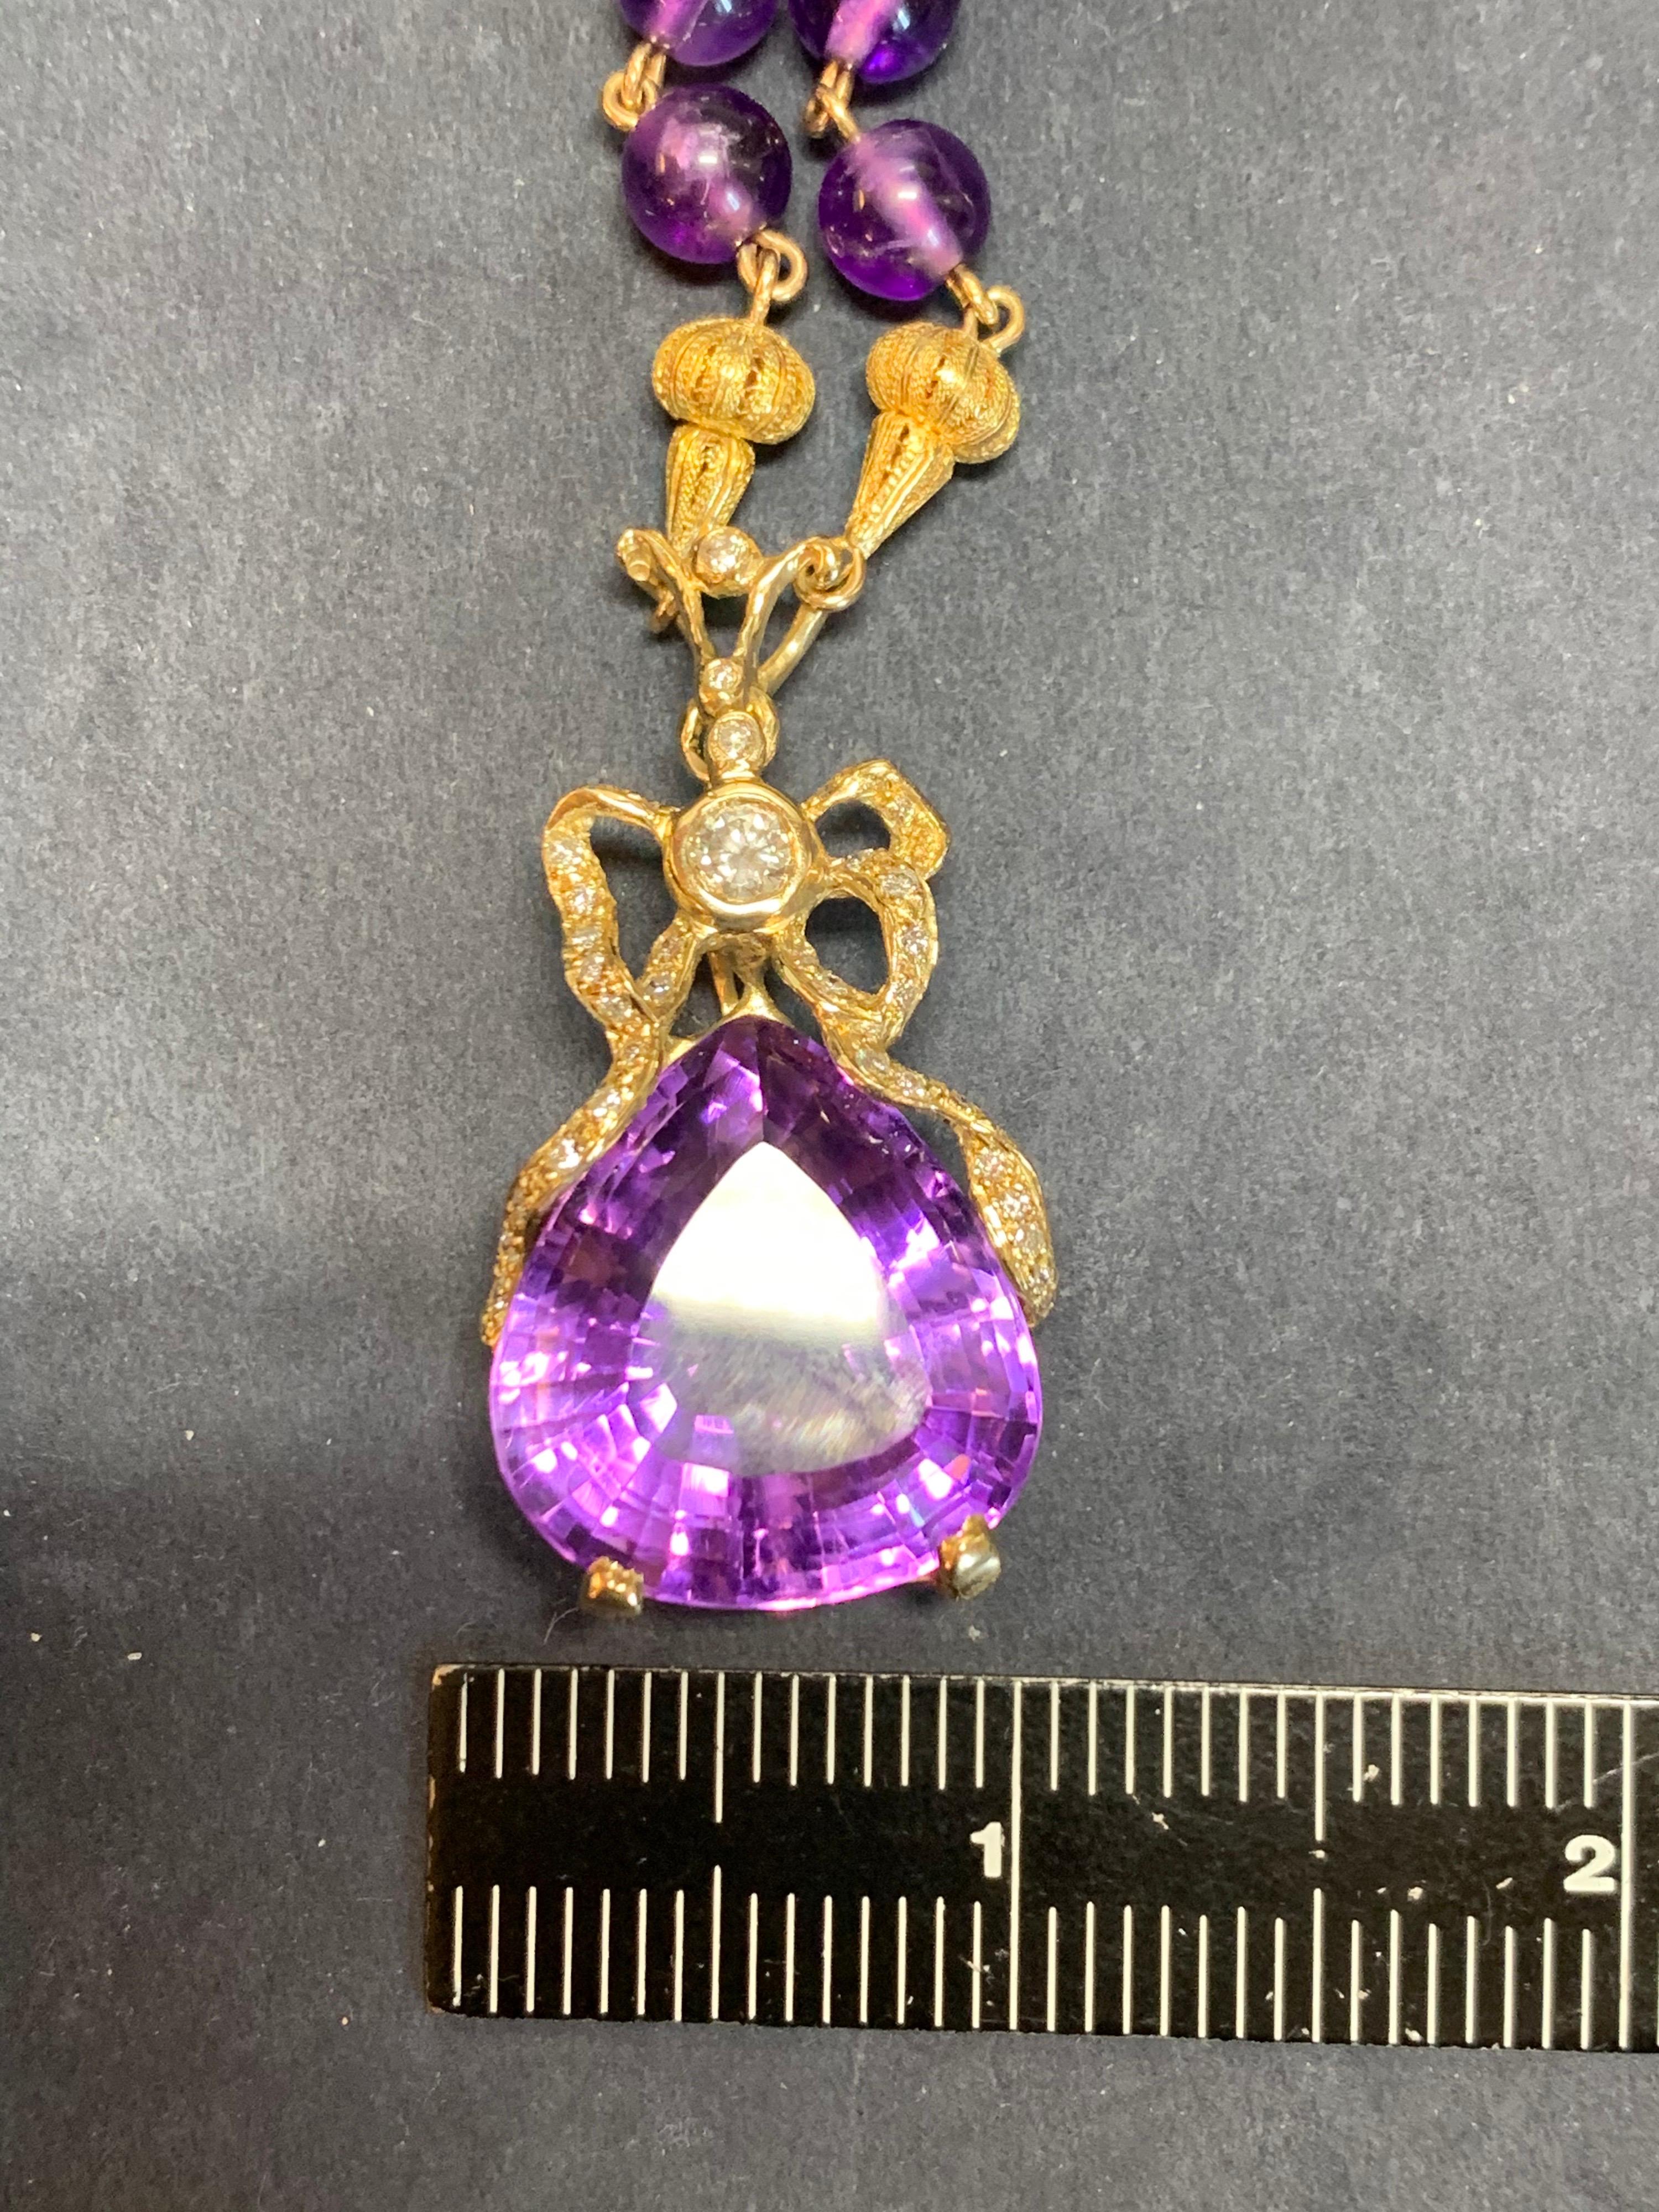 Retro Gold 35 Carat Natural Amethyst and Diamond Pendant Necklace, circa 1960 For Sale 8